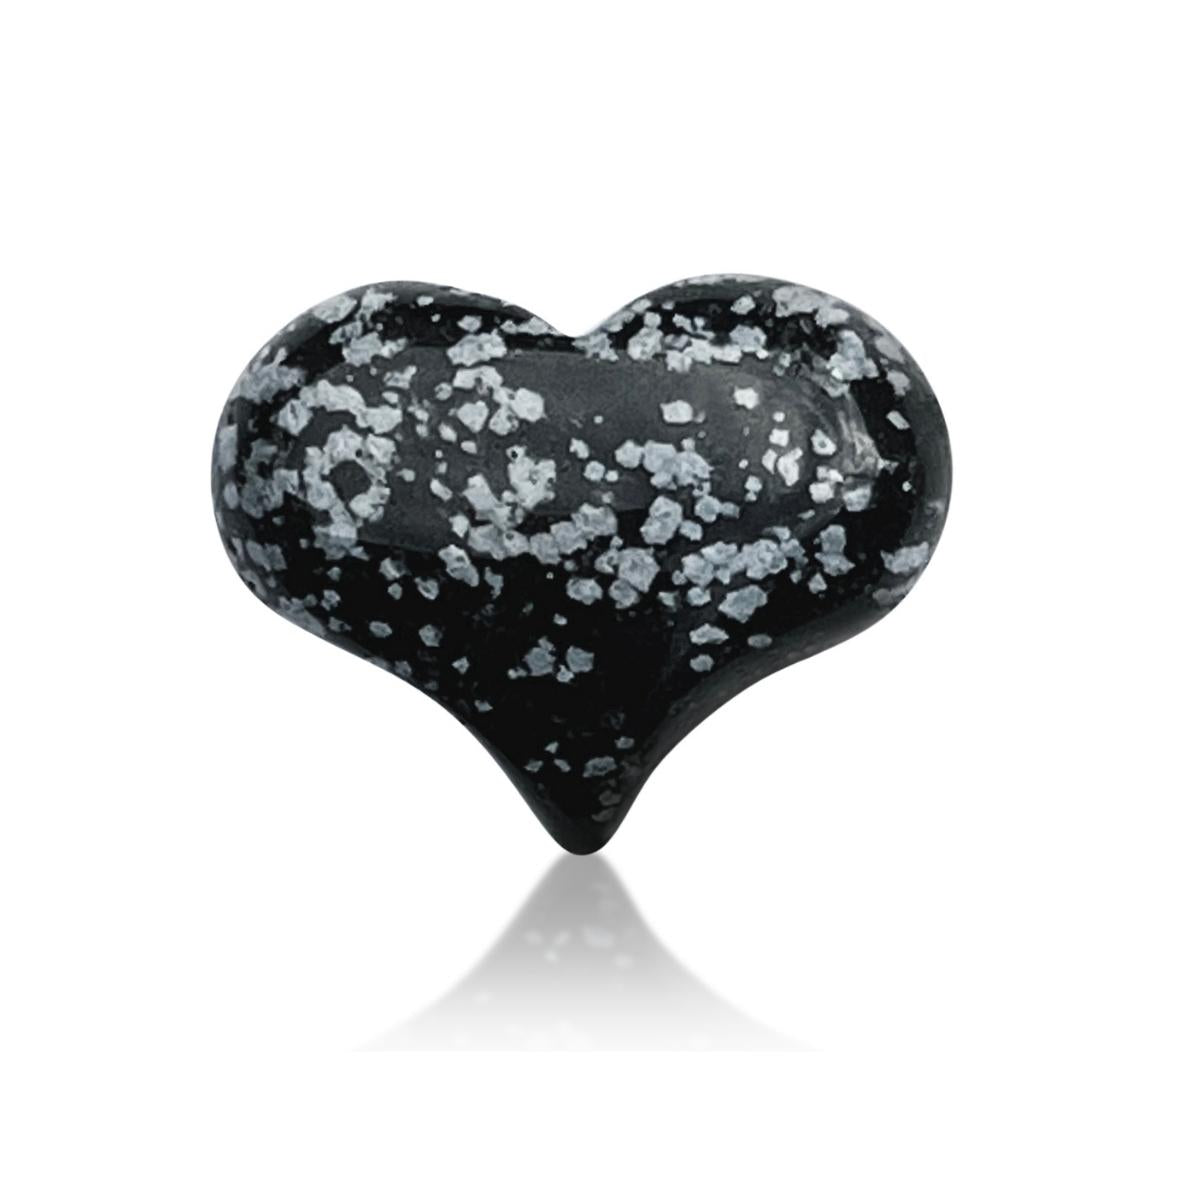 Snowflake Obsidian Heart Shaped Healing Gemstone for Releasing “Wrong Thinking” and stressful mental patterns. Snowflake Obsidian is calming and soothing.  It teaches you to value mistakes as well as successes.  A stone of purity, Snowflake Obsidian provides balance for body, mind and spirit. 